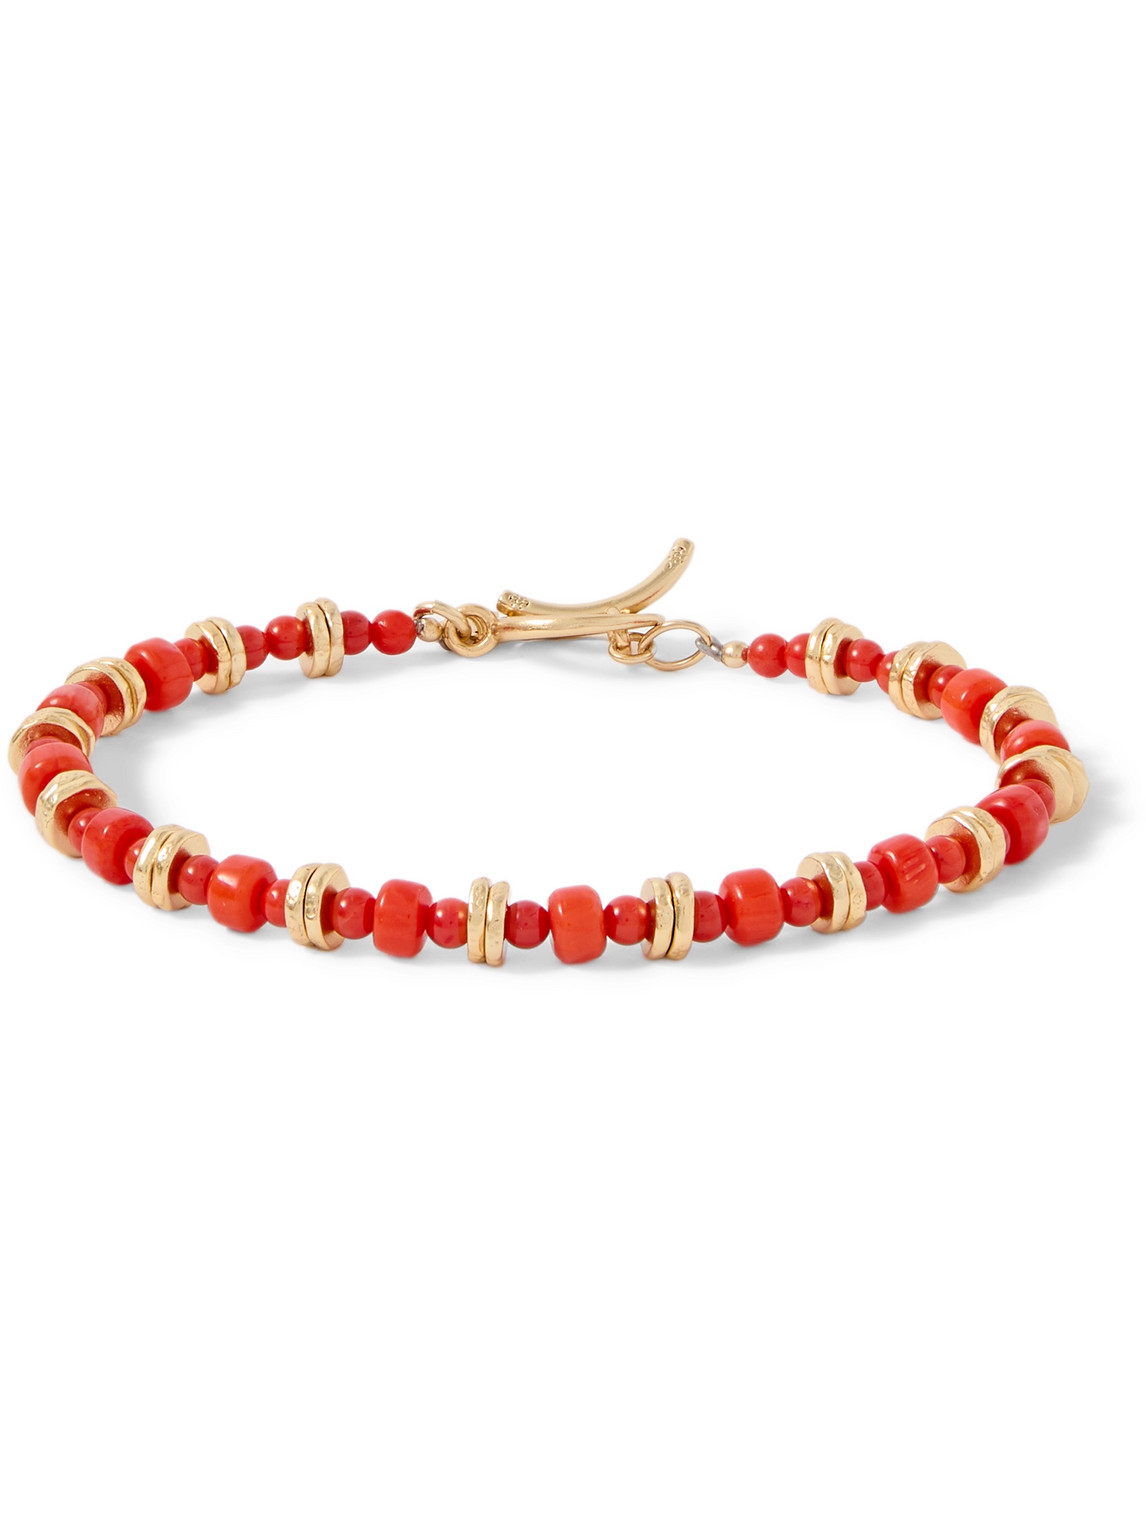 Peyote Bird Fox Gold-plated Coral Beaded Bracelet In Red